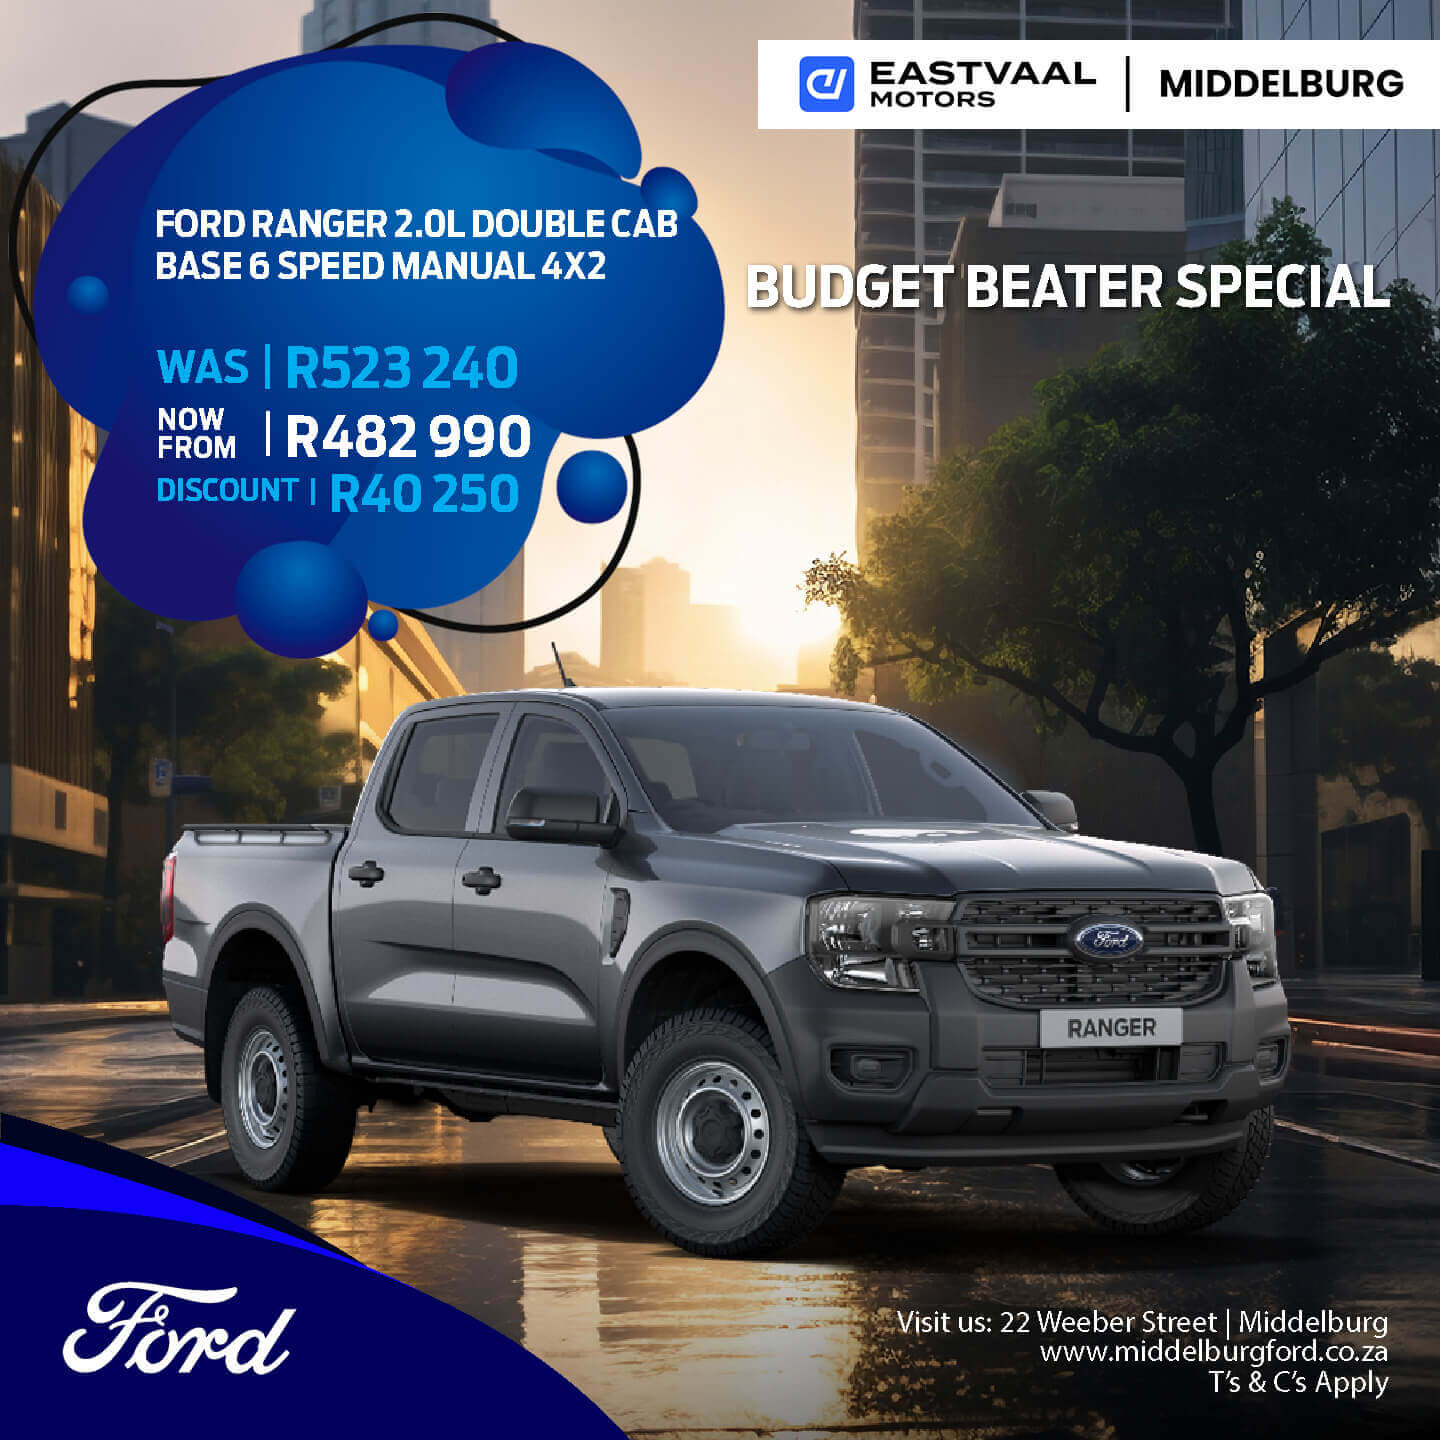 FORD RANGER 2.0L DOUBLE CAB image from Eastvaal Motors